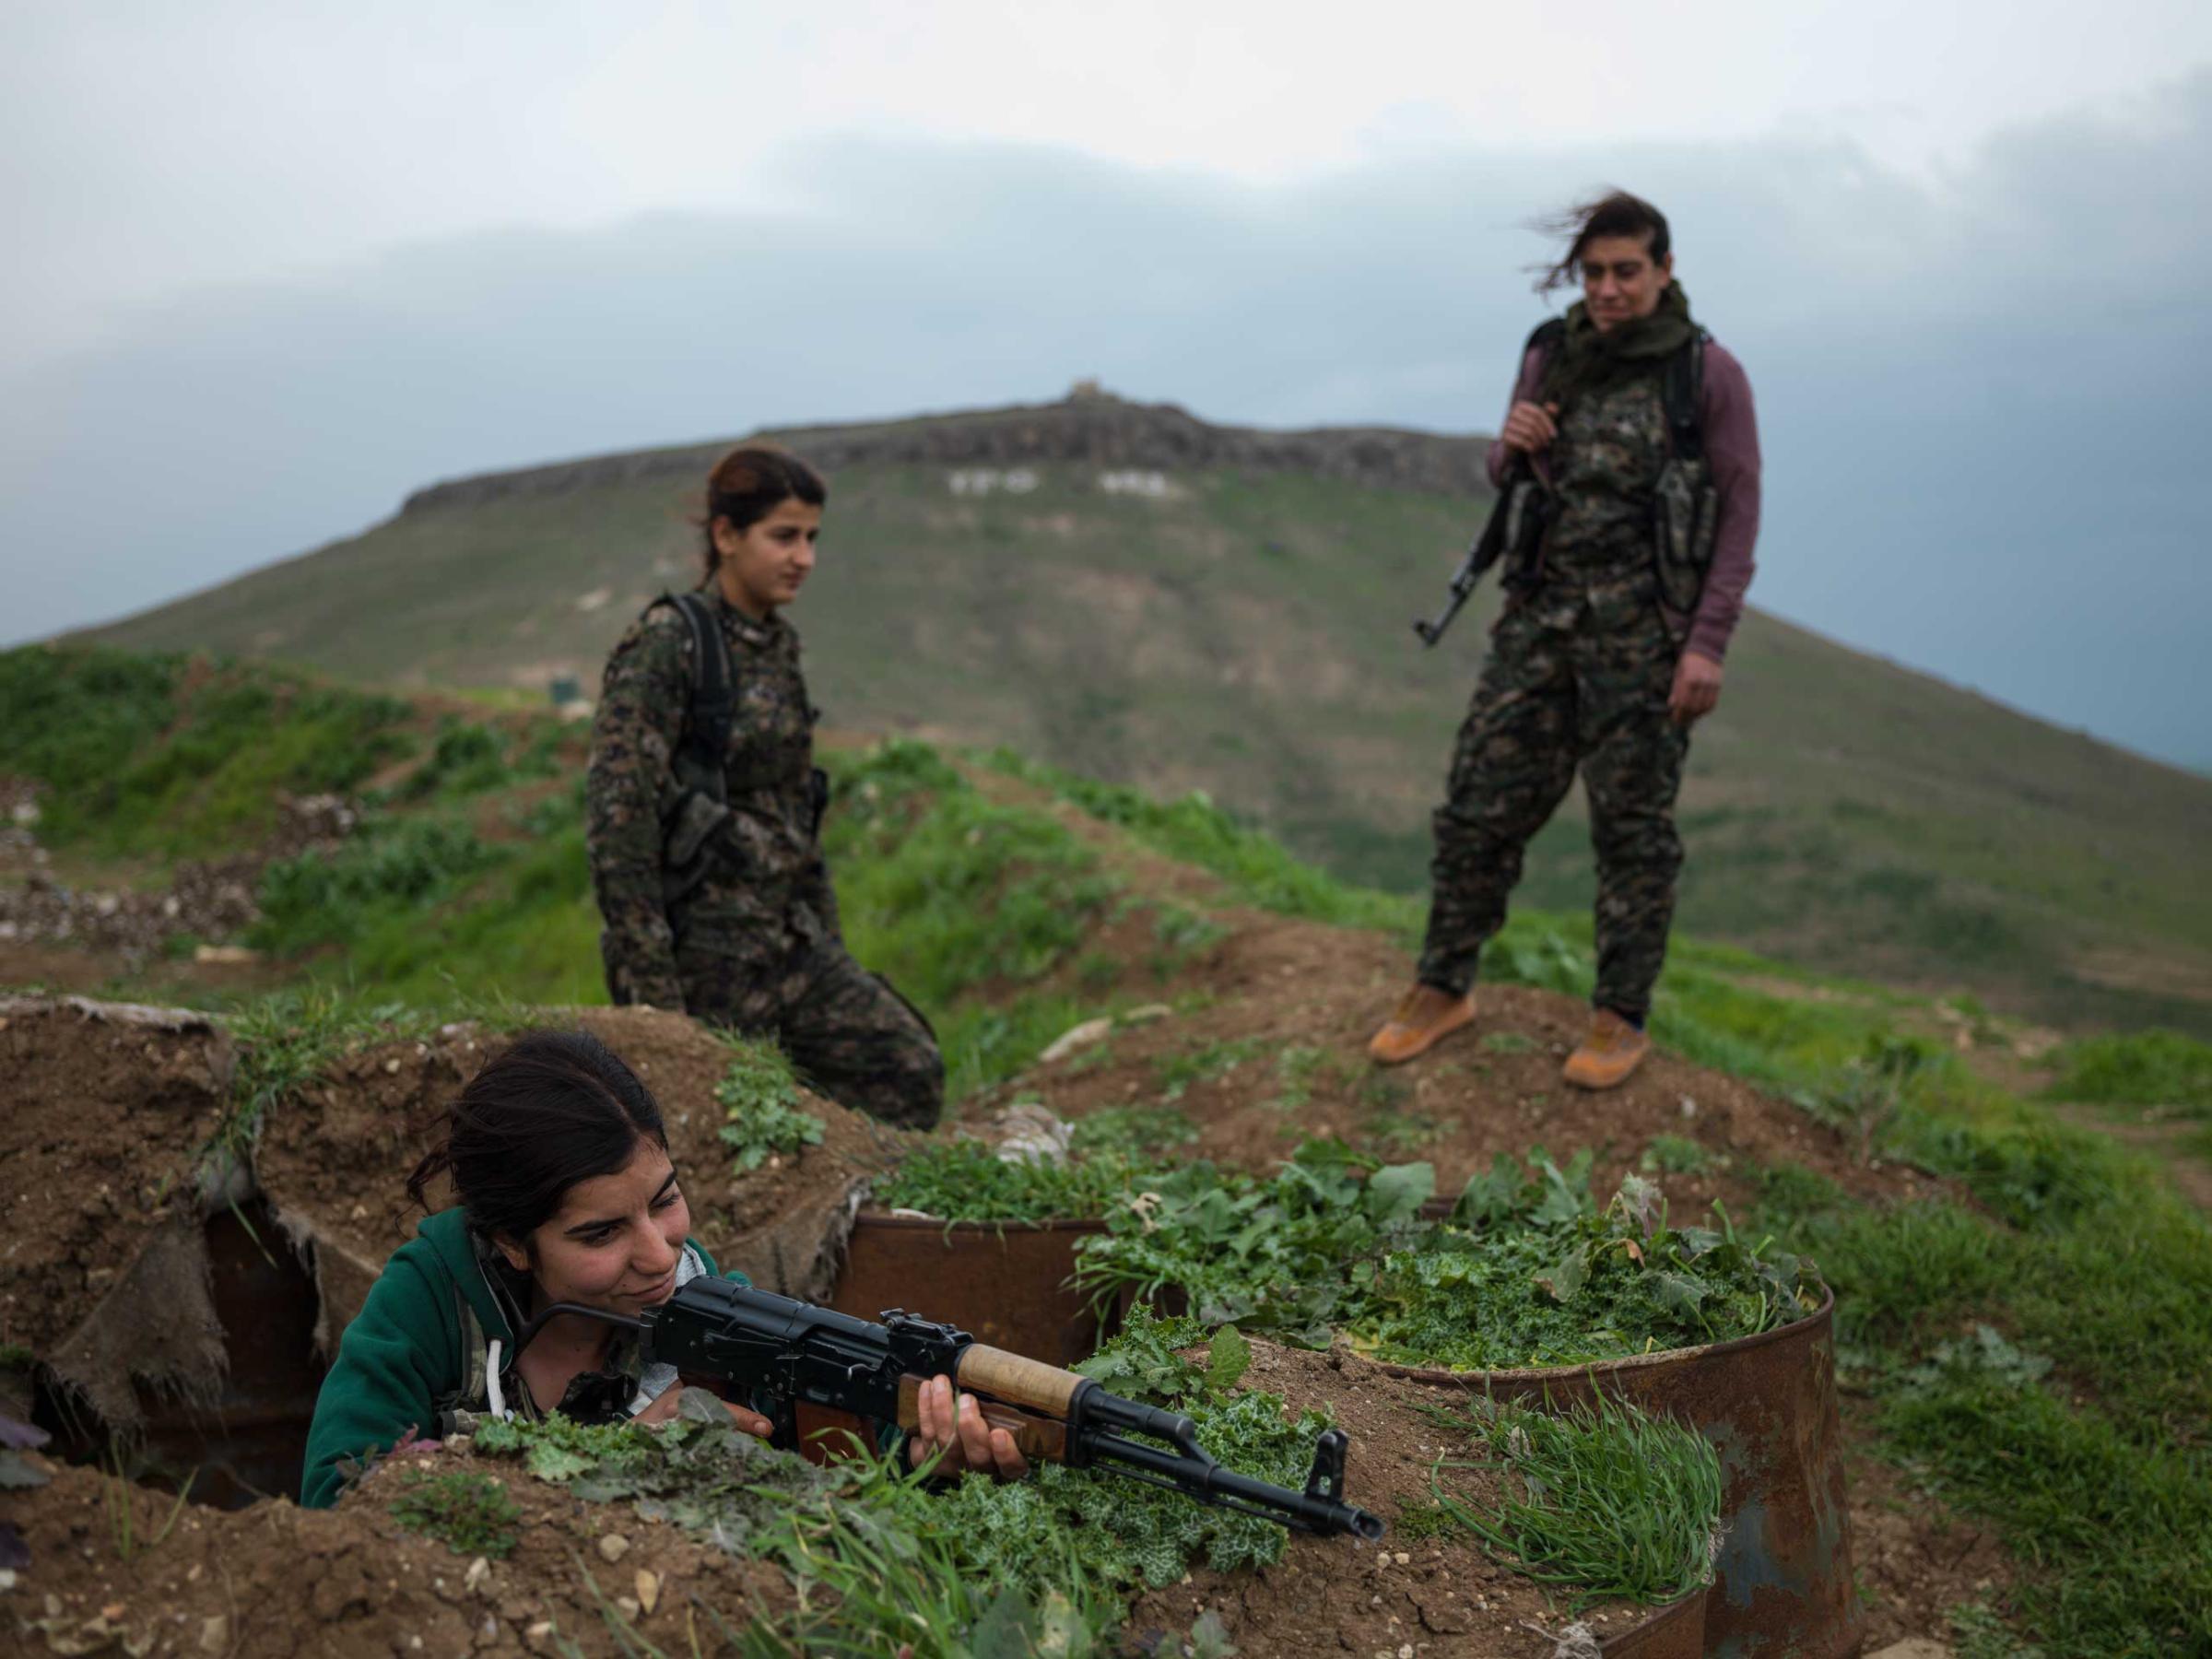 YPJ fighters on their base at the border between Syria and Iraq. Young female fighters are indoctrinated to the ideology of their charismatic leader, Abdullah Ocalan, head of the Kurdish Workers' Party (PKK), who promotes marxist thought and empowerment of women.Newsha Tavakolian for TIME